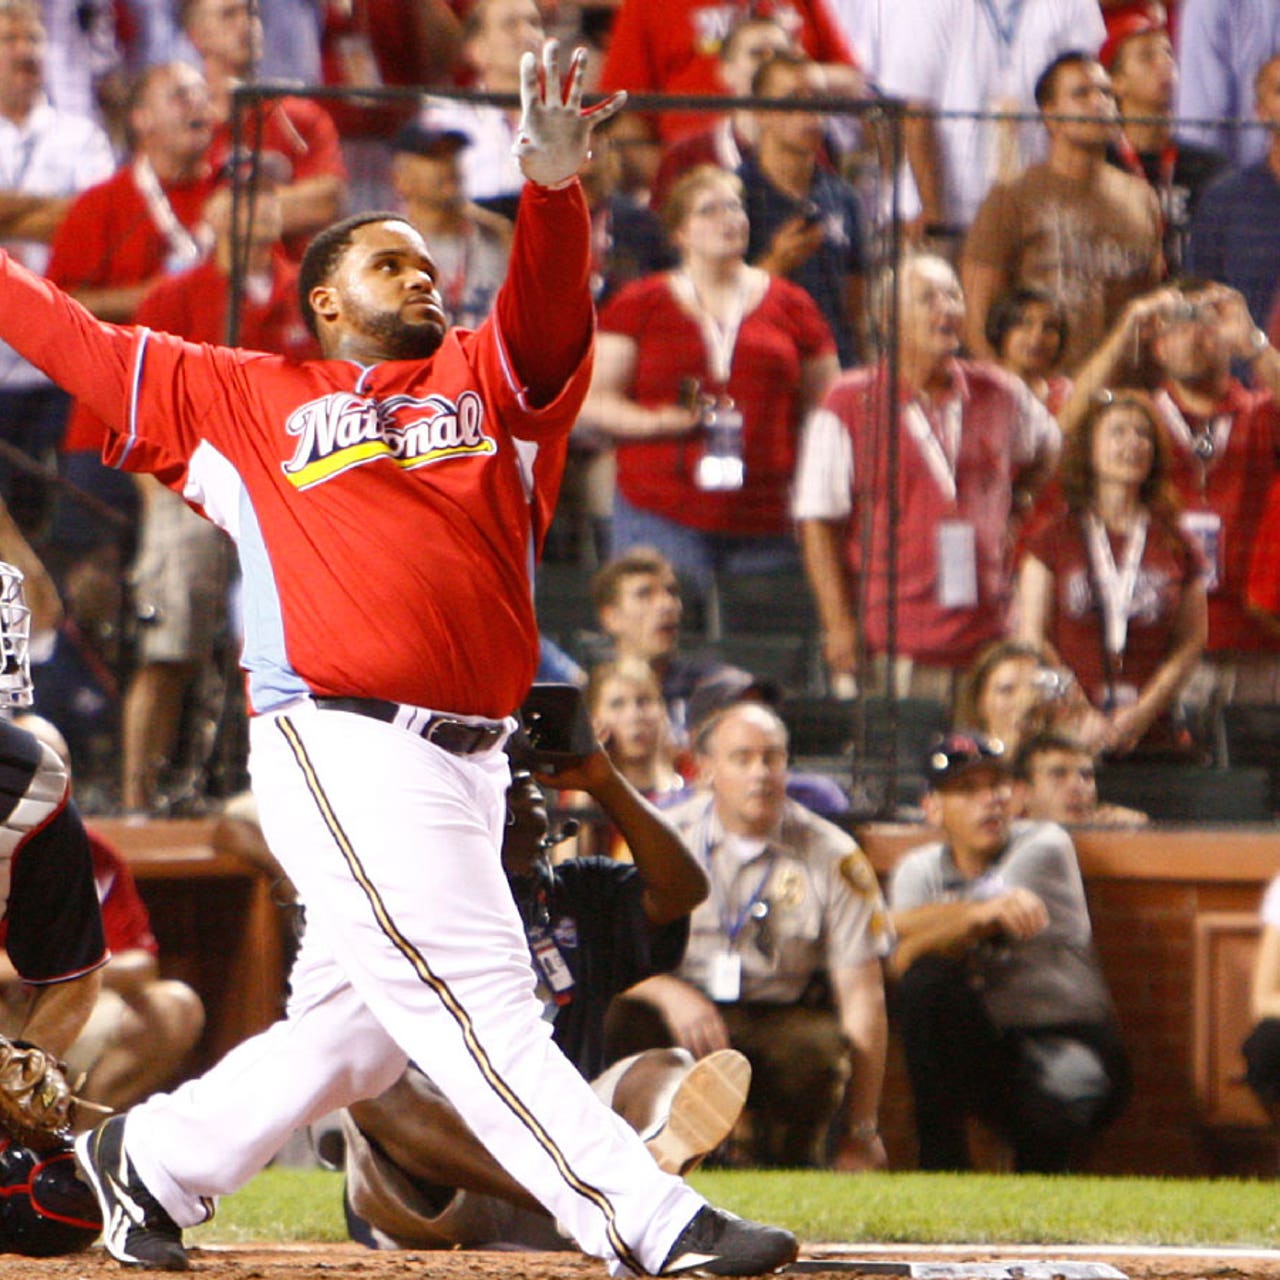 Prince Fielder wins Home Run Derby for 2nd time - The San Diego